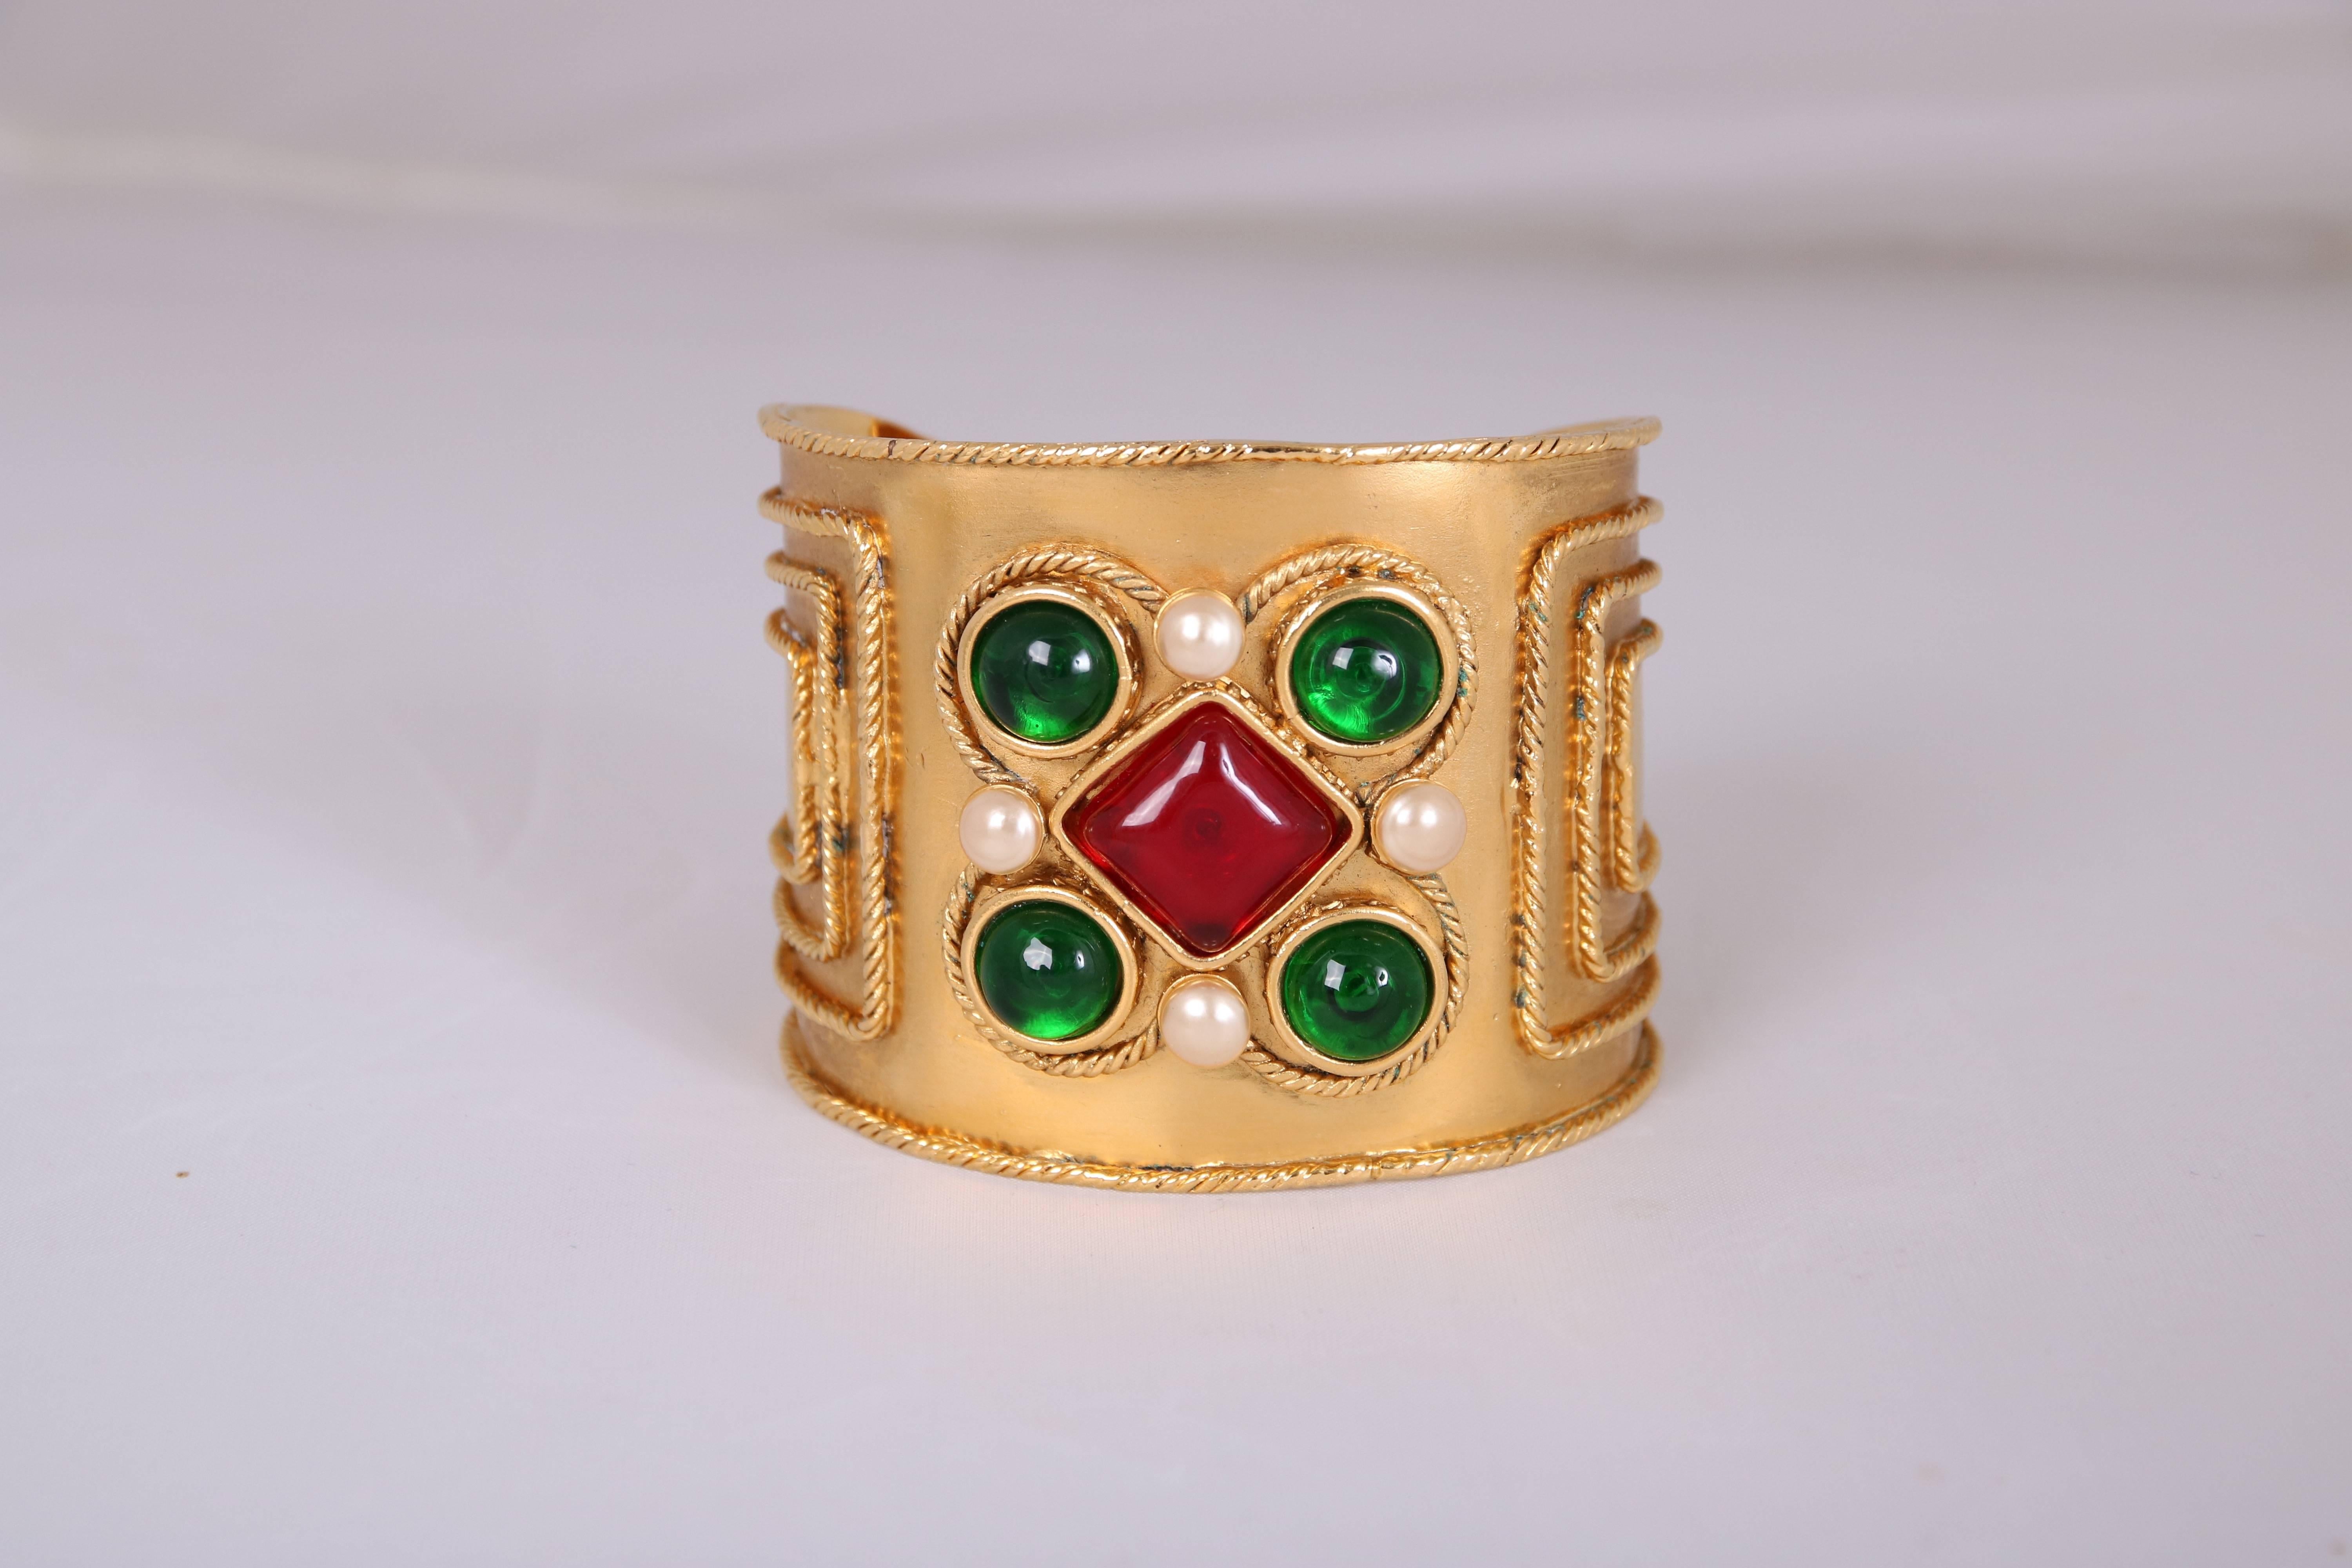 2005 Chanel cuff featuring bezel set pearl beads and green and red gripoix stones. Stamped on Chanel cartouche at interior. In excellent condition.